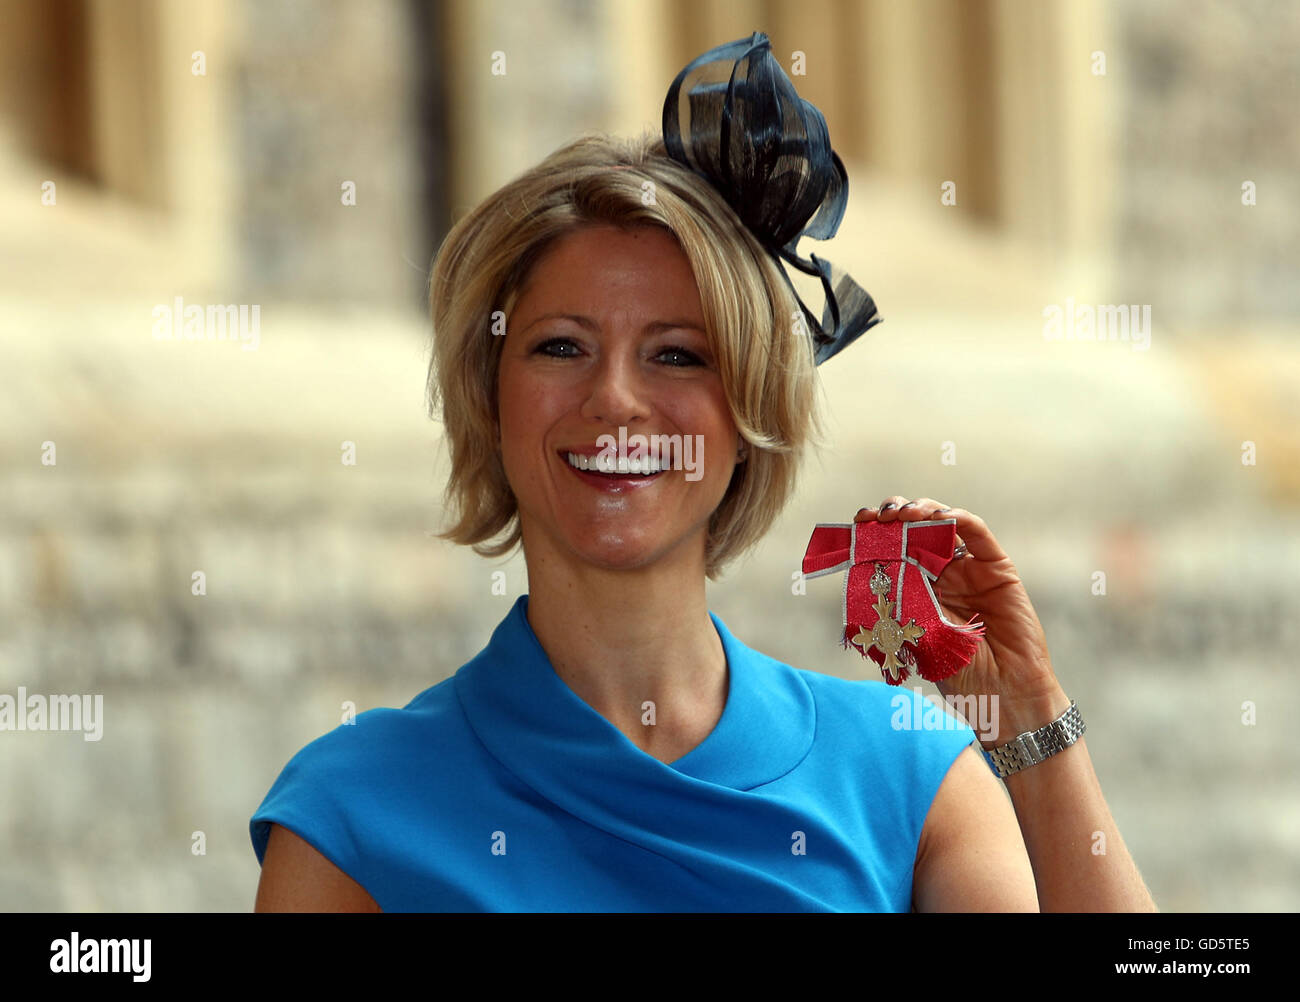 Jacqueline Oatley, Sports Broadcaster and Board Member, Women in Football, after receiving her Member of the Order of the British Empire (MBE) medal by Princess Royal, at an Investiture ceremony in Windsor Castle, Berkshire. Stock Photo